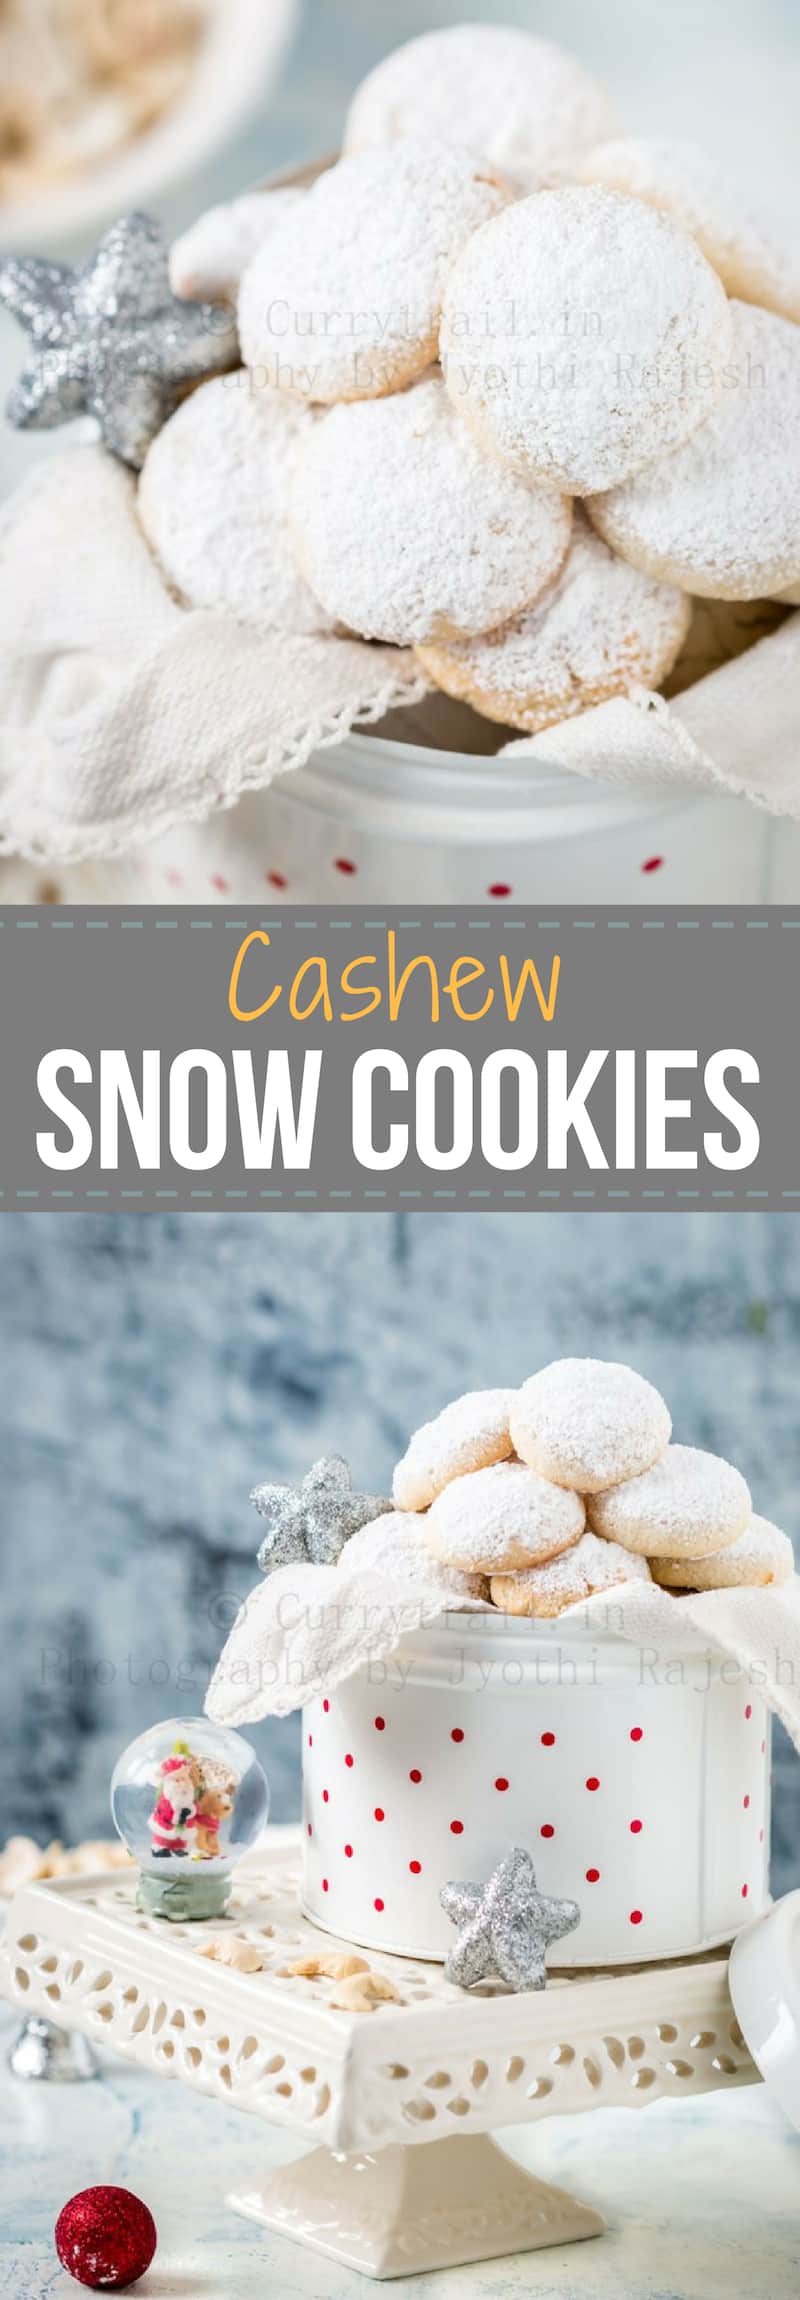 cashew snow cookies in white cookie jar with text overlay